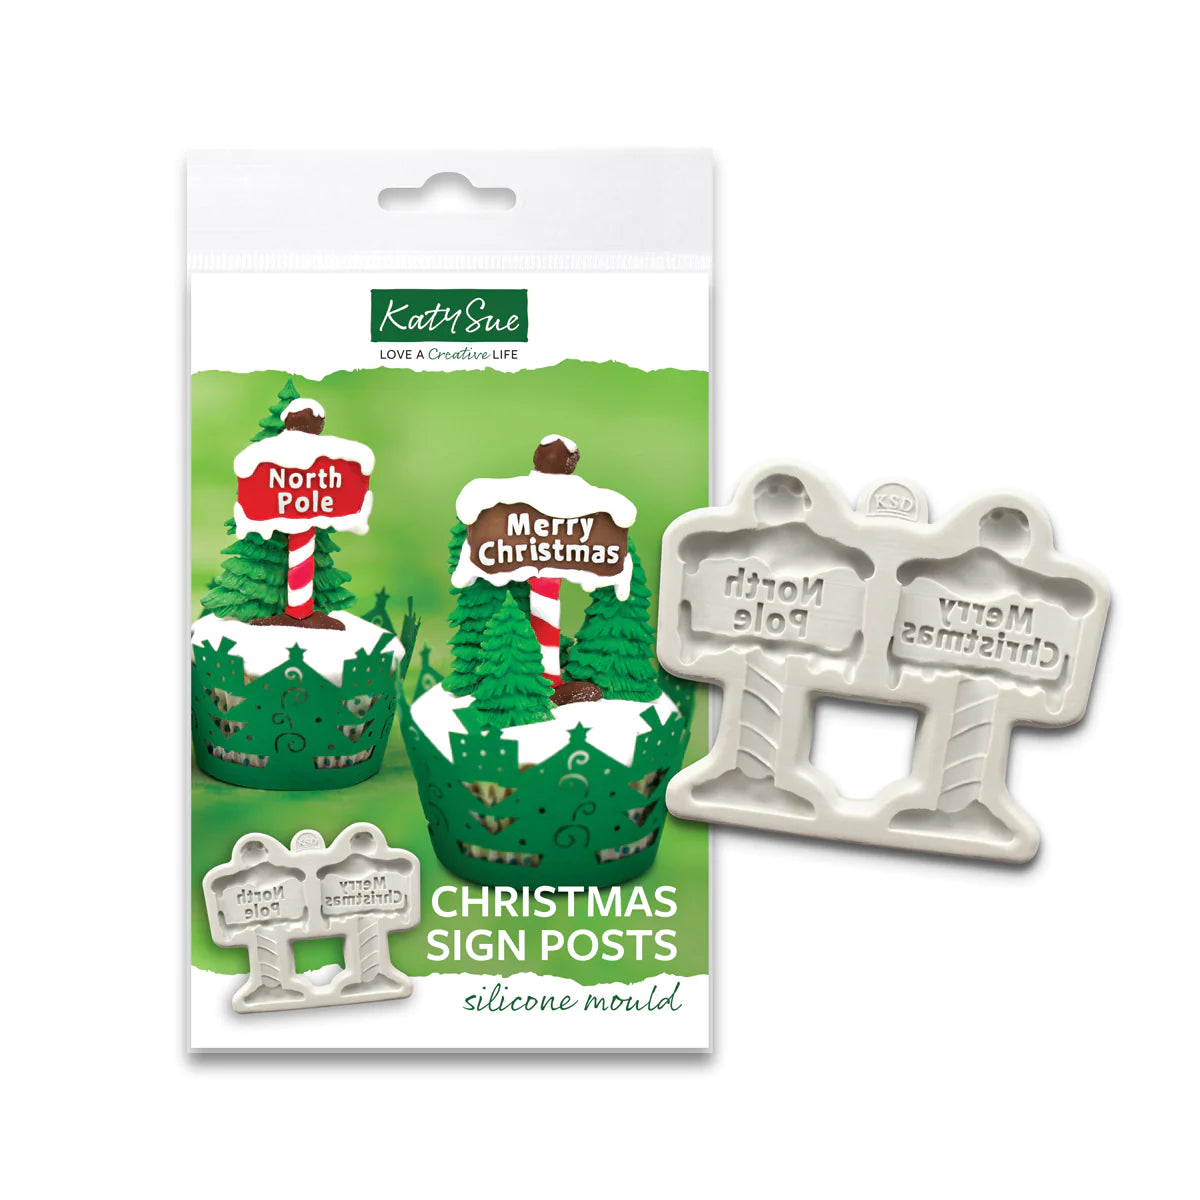 Katy Sue Christmas Signposts Silicone Mould